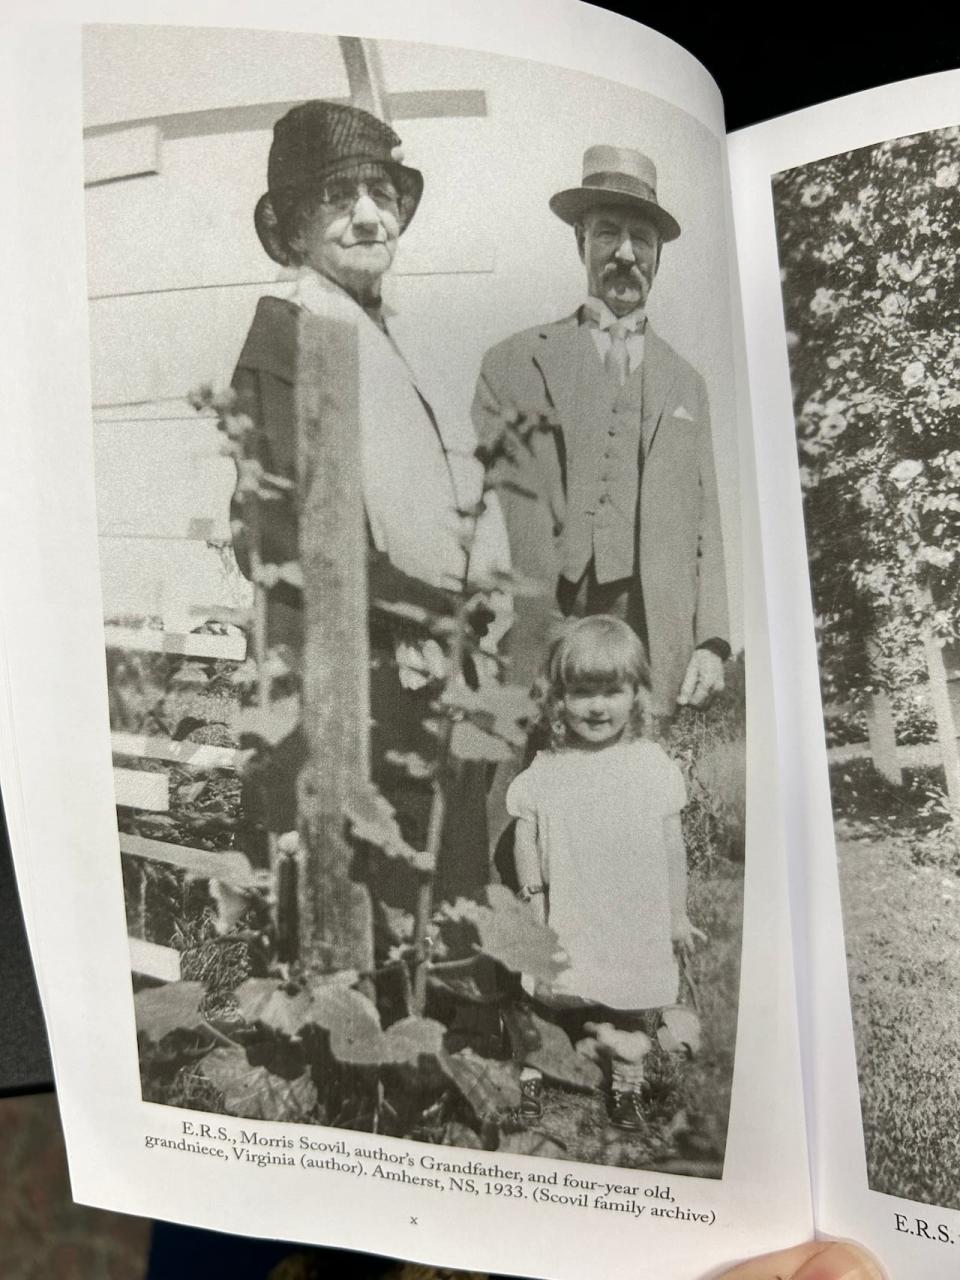 Bjerkelund said she still remembers posing for this photograph with her aunt and her grandfather in Amherst, N.S., in 1933. 